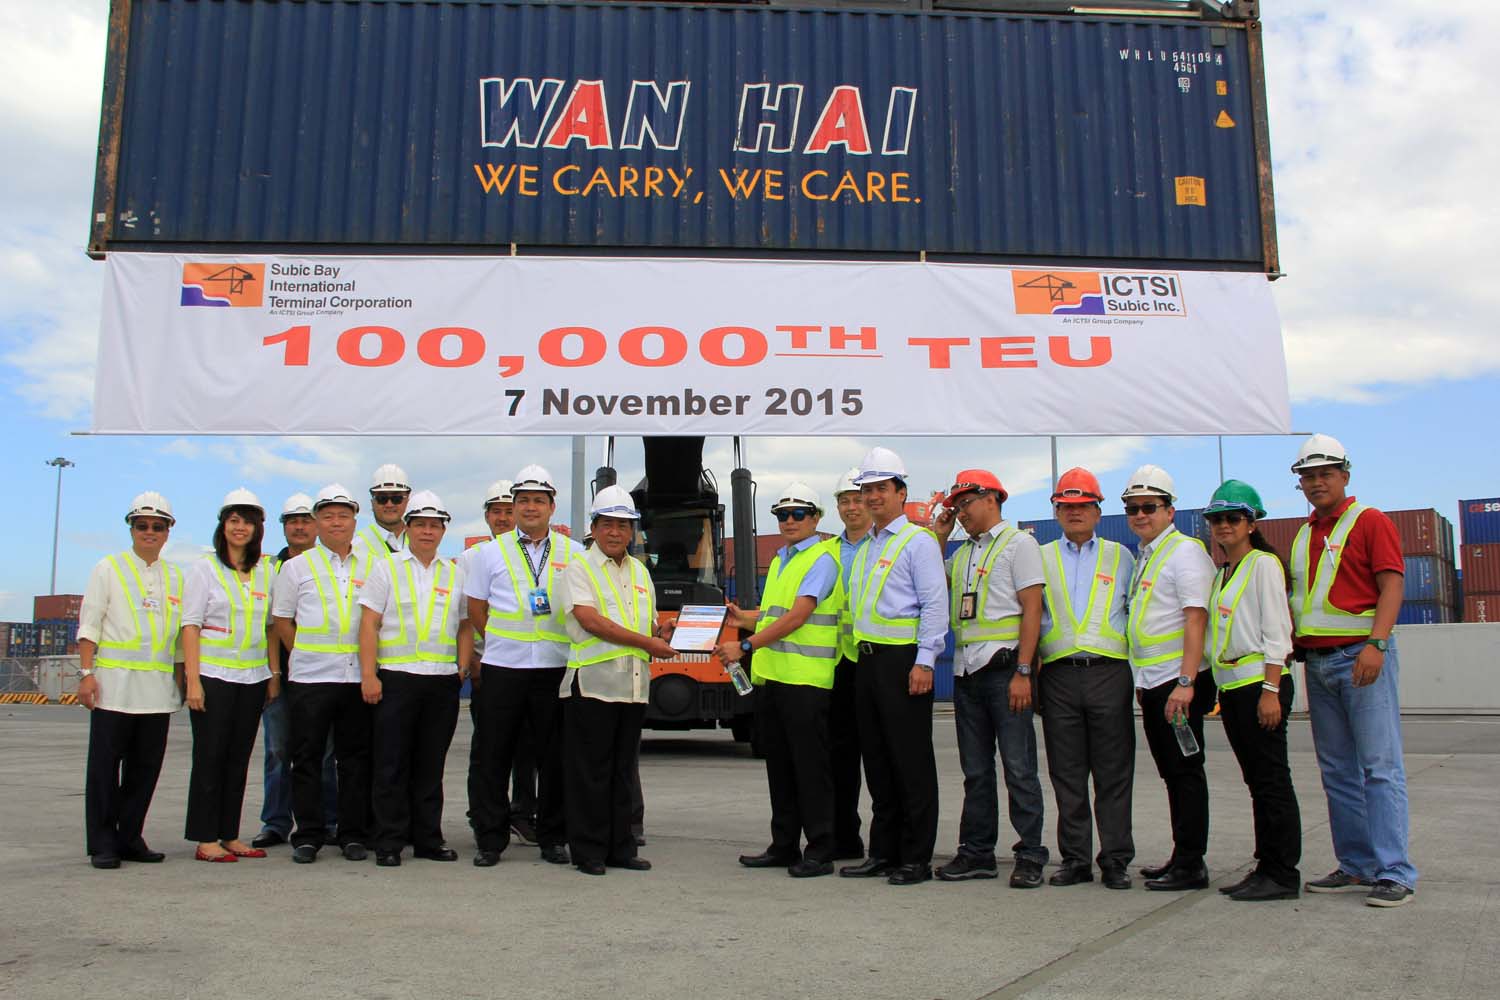 SBMA Chairman Roberto Garcia (middle, left) receives from SBITC general manager Roberto Locsin a copy of documents marking the arrival of the 100,000th TEU at the New Container Terminal 2 in Subic Bay Freeport.